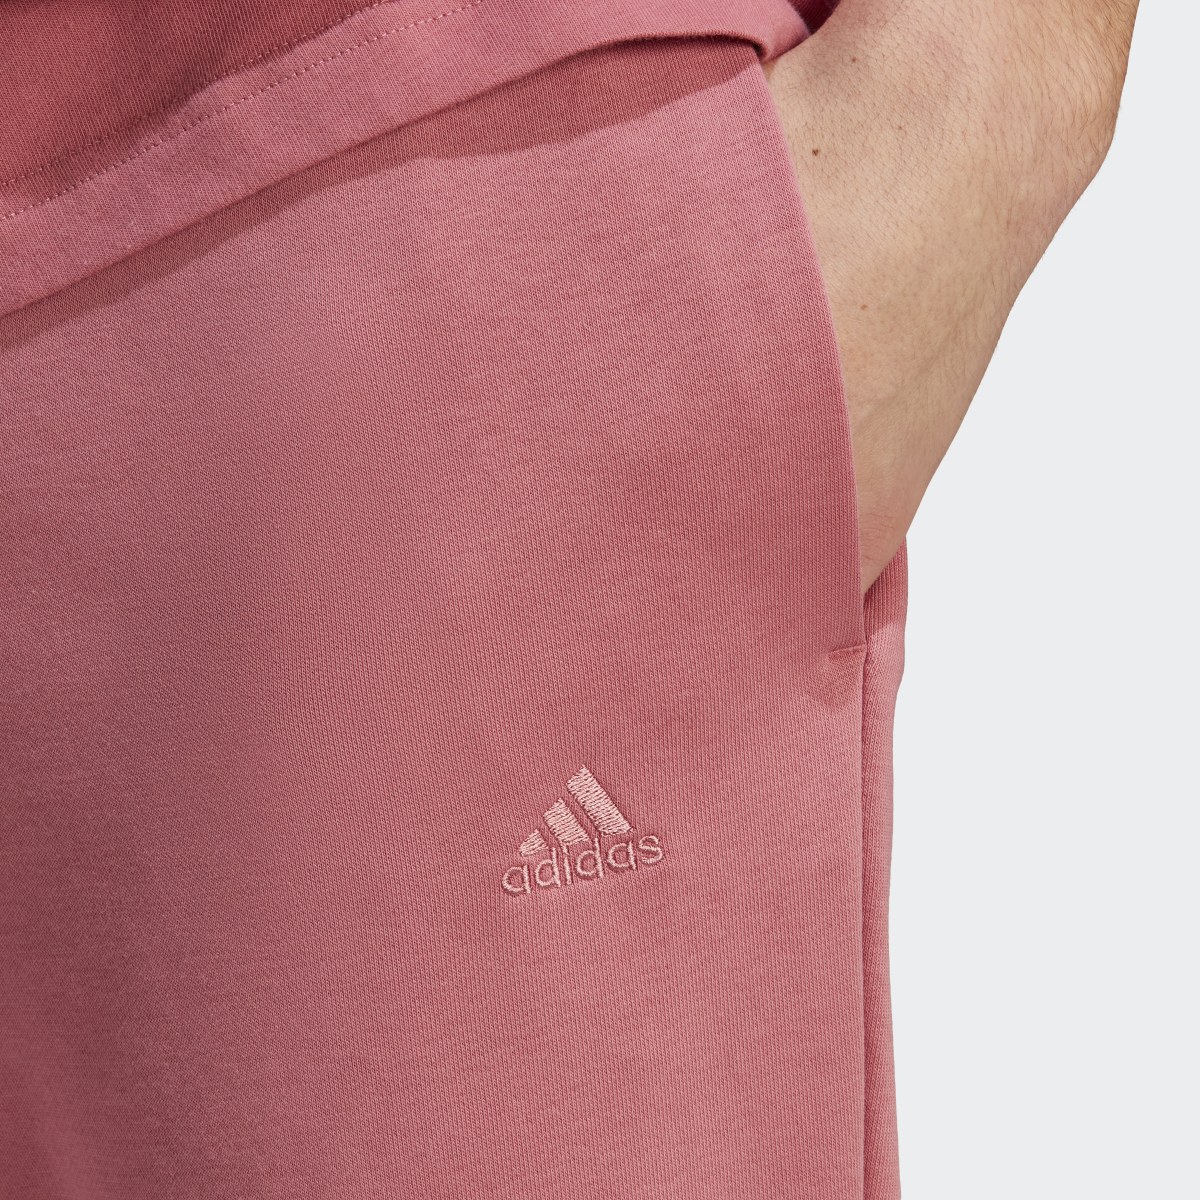 Adidas ALL SZN French Terry Pants. 5